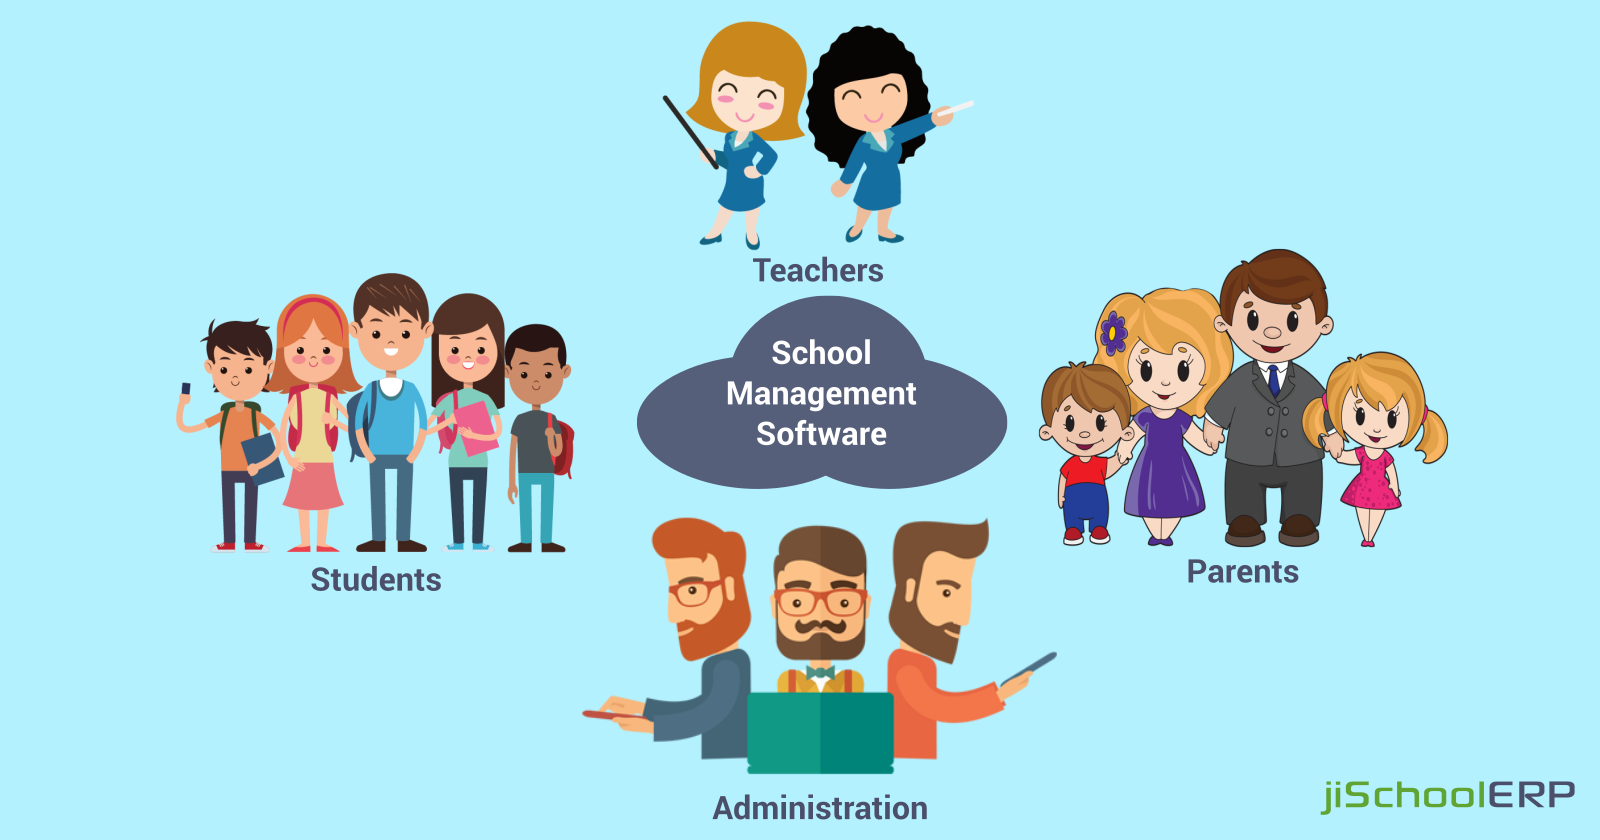 Who All Can Benefit From A School Management Software?